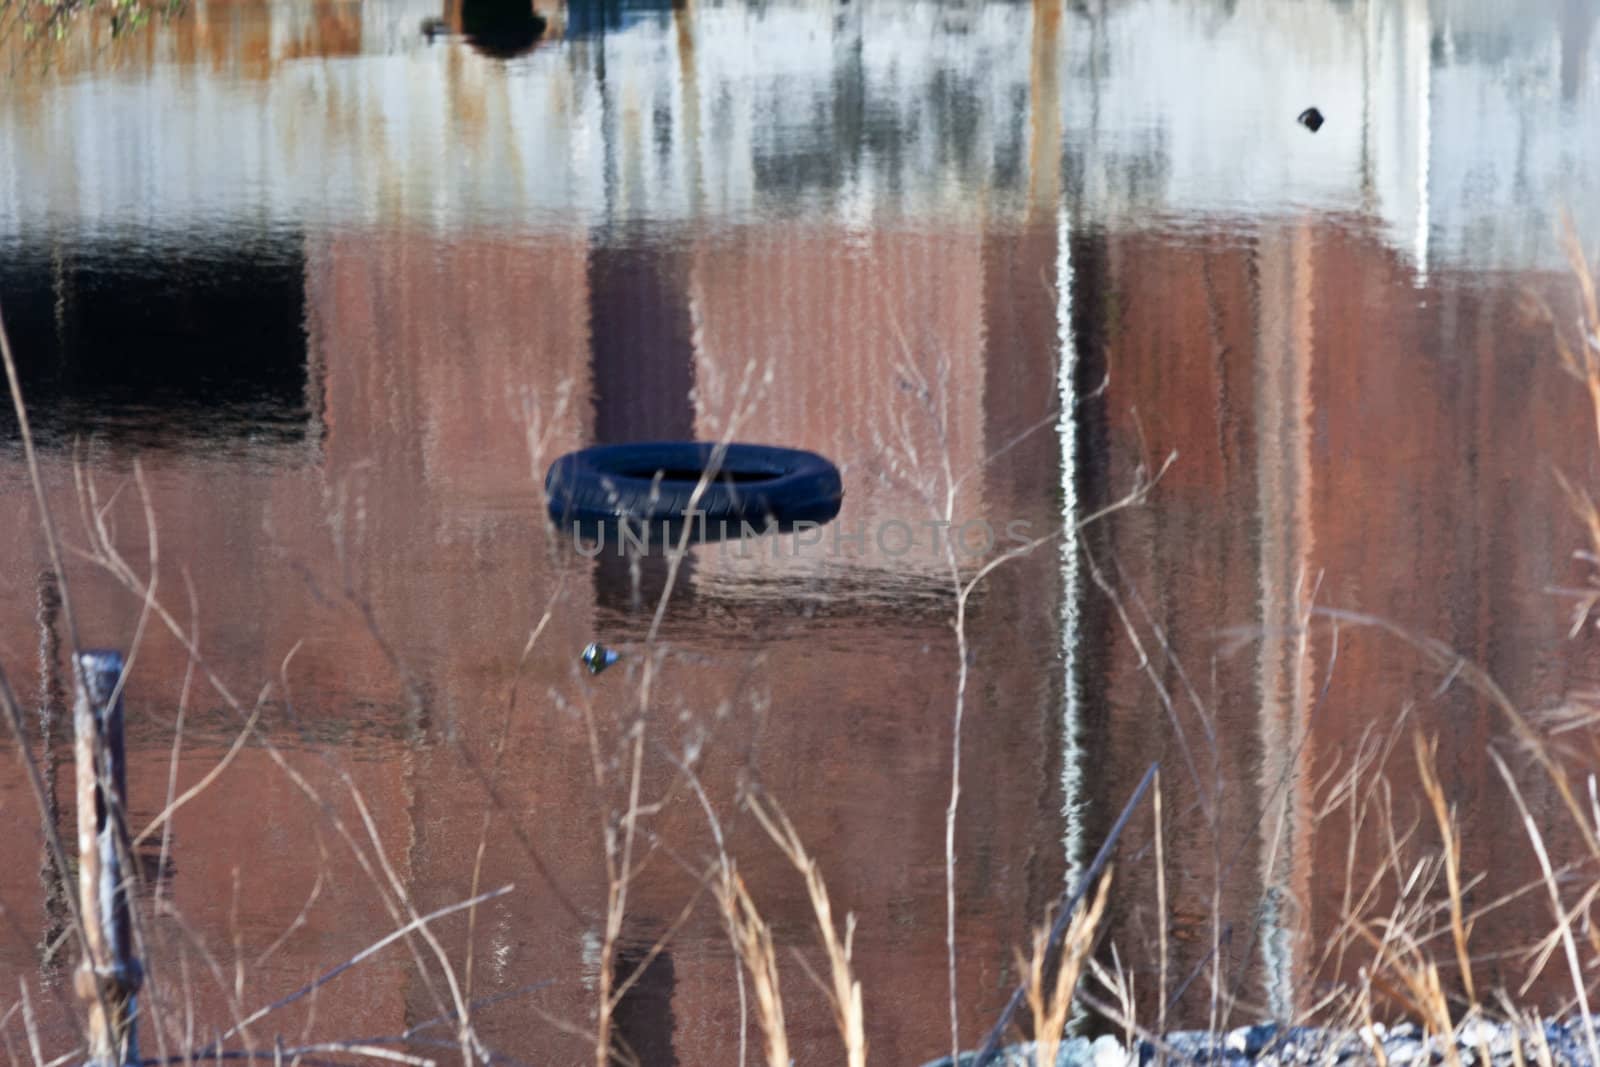 Floating tire in old mill coolig pond. by rothphotosc